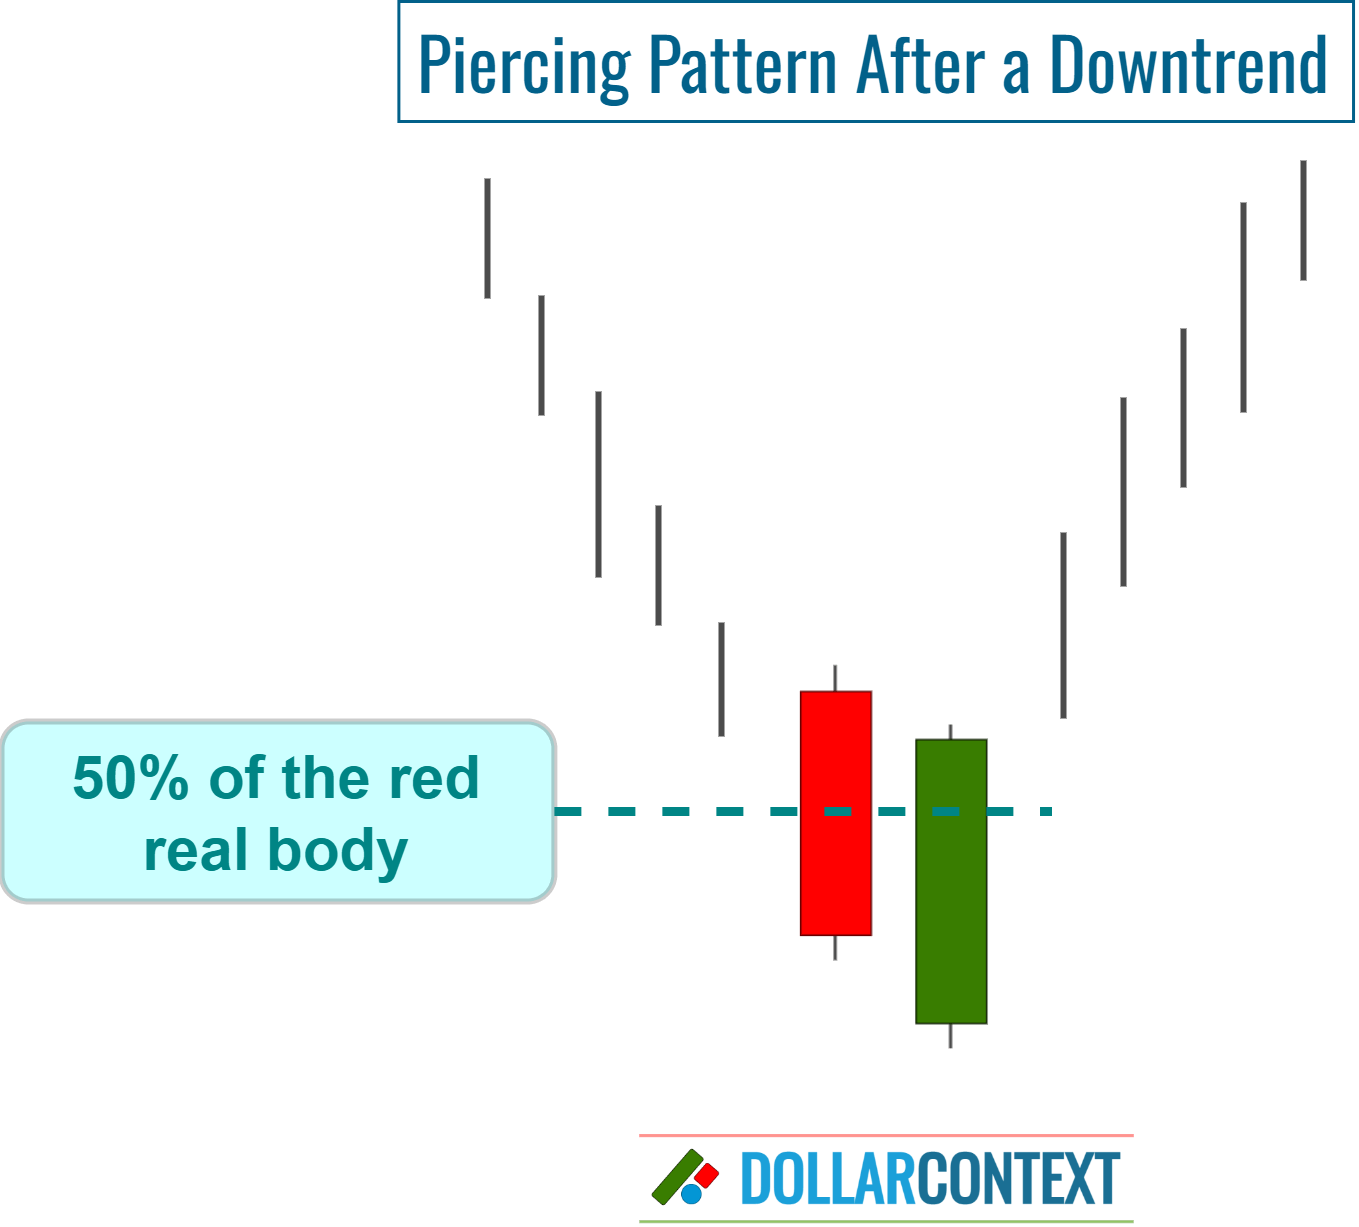 Piercing Pattern After a Mature or Pronounced Downtrend